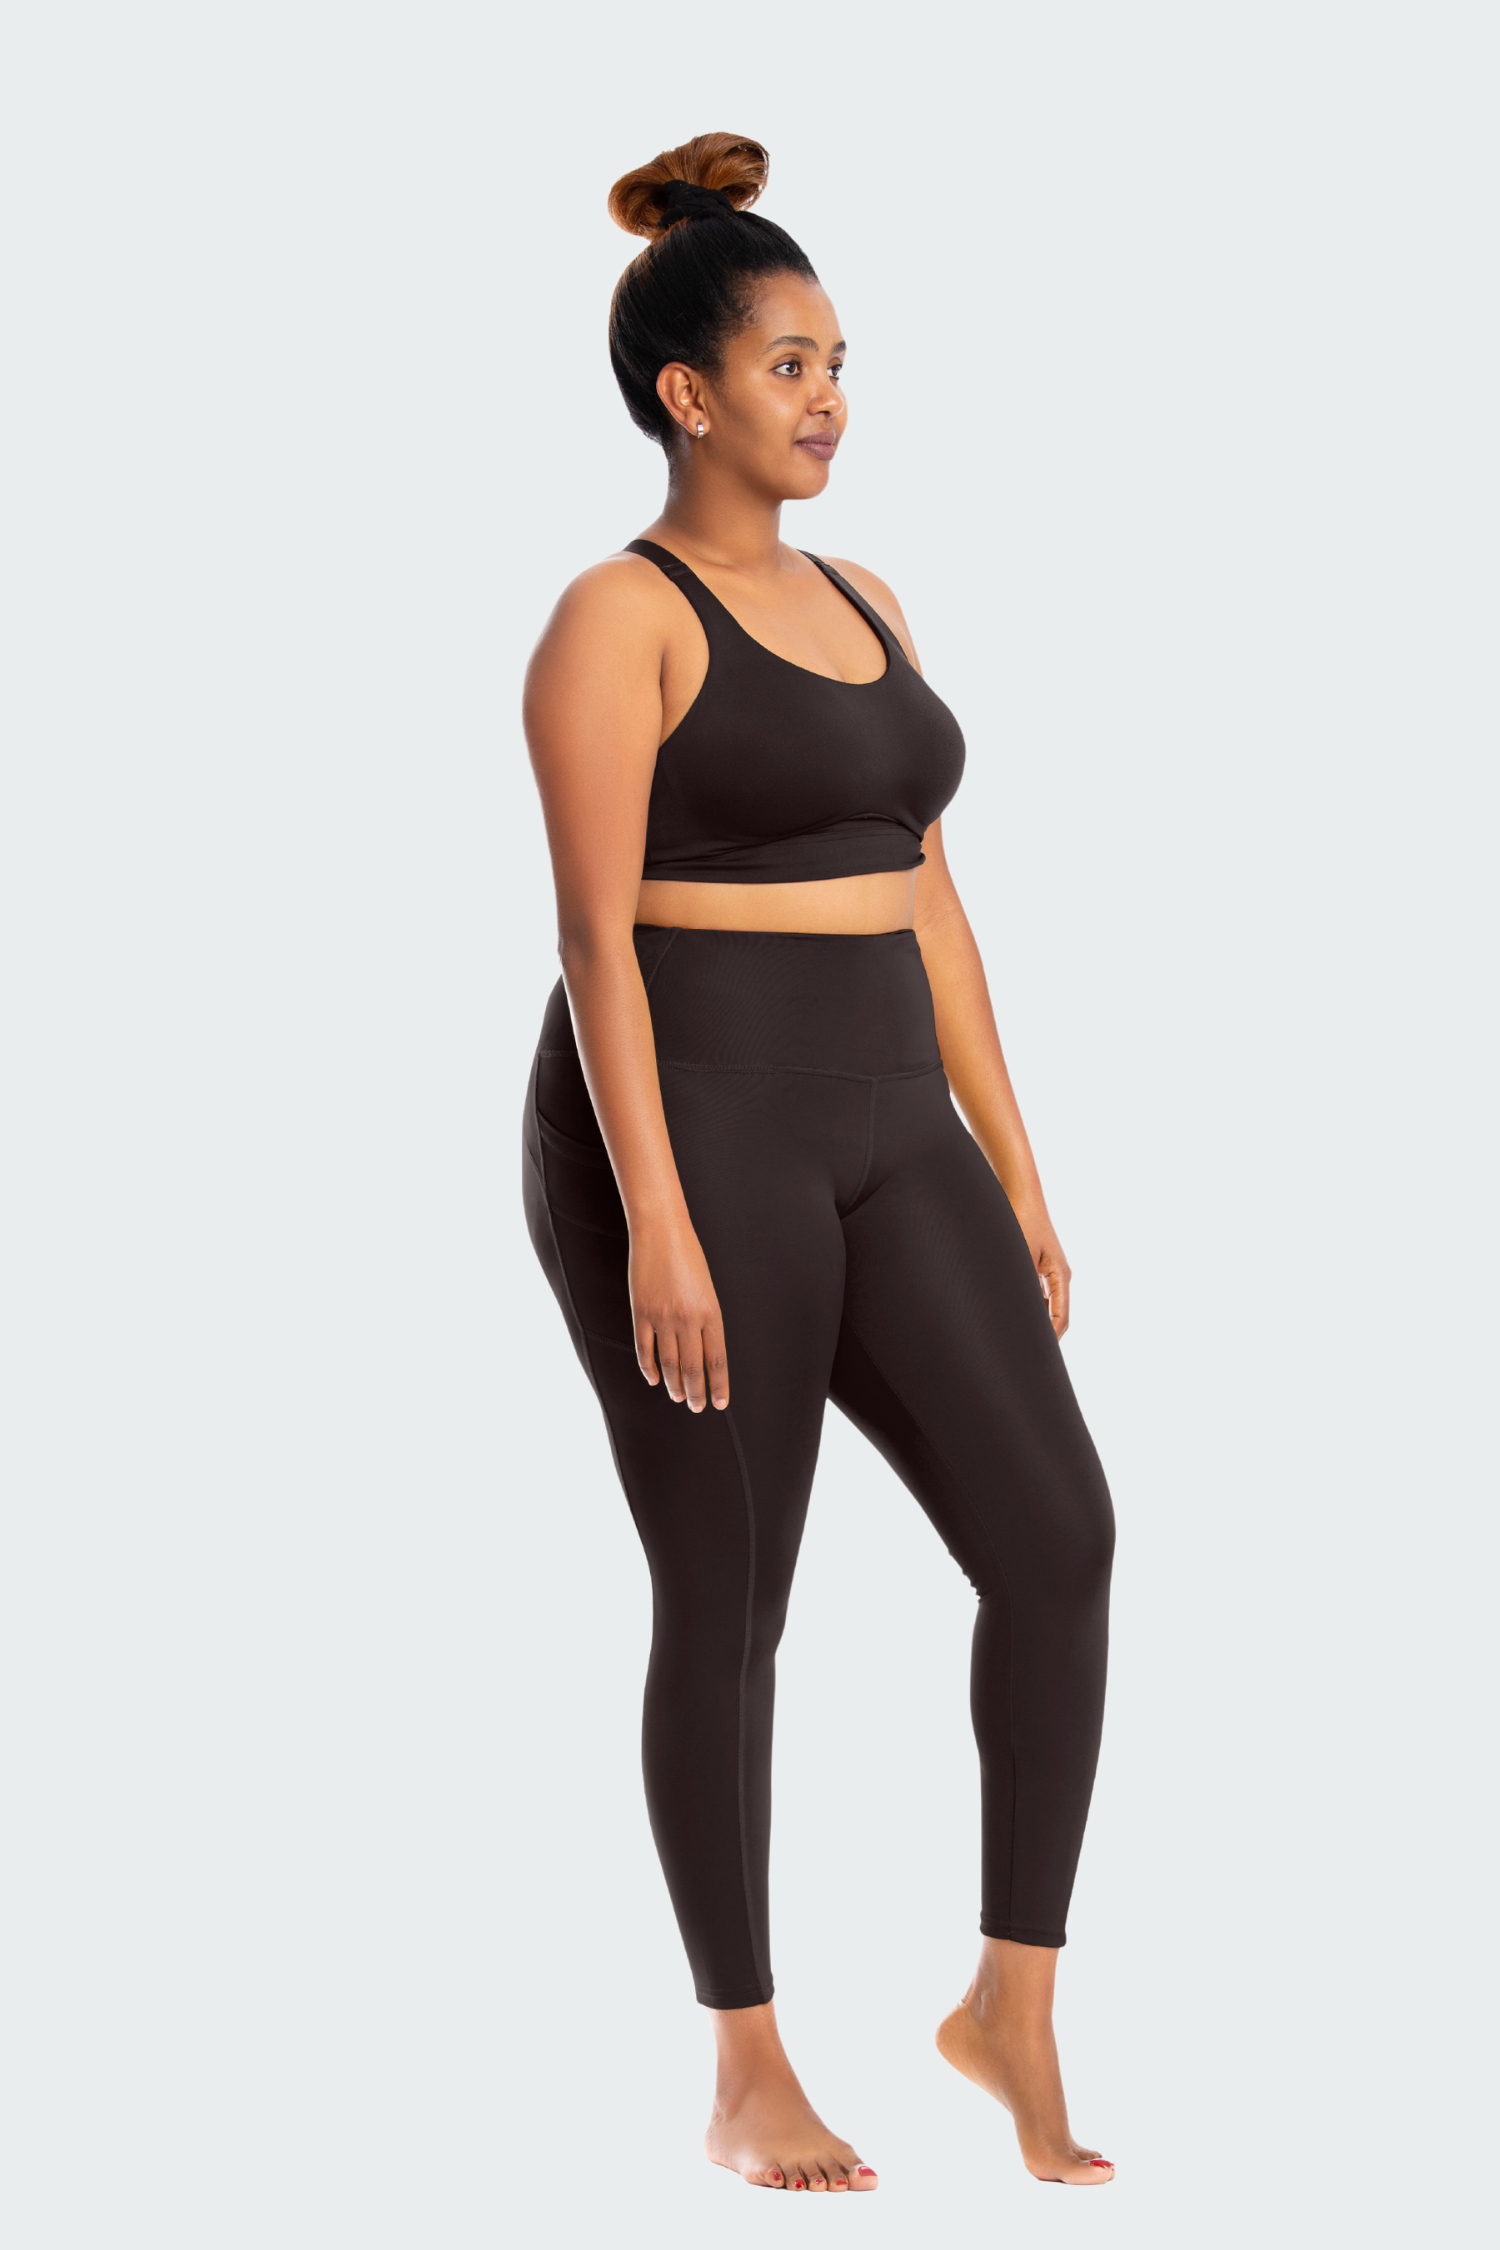 The Best Plus Size Gym Leggings for Every Activity | The Sports Edit